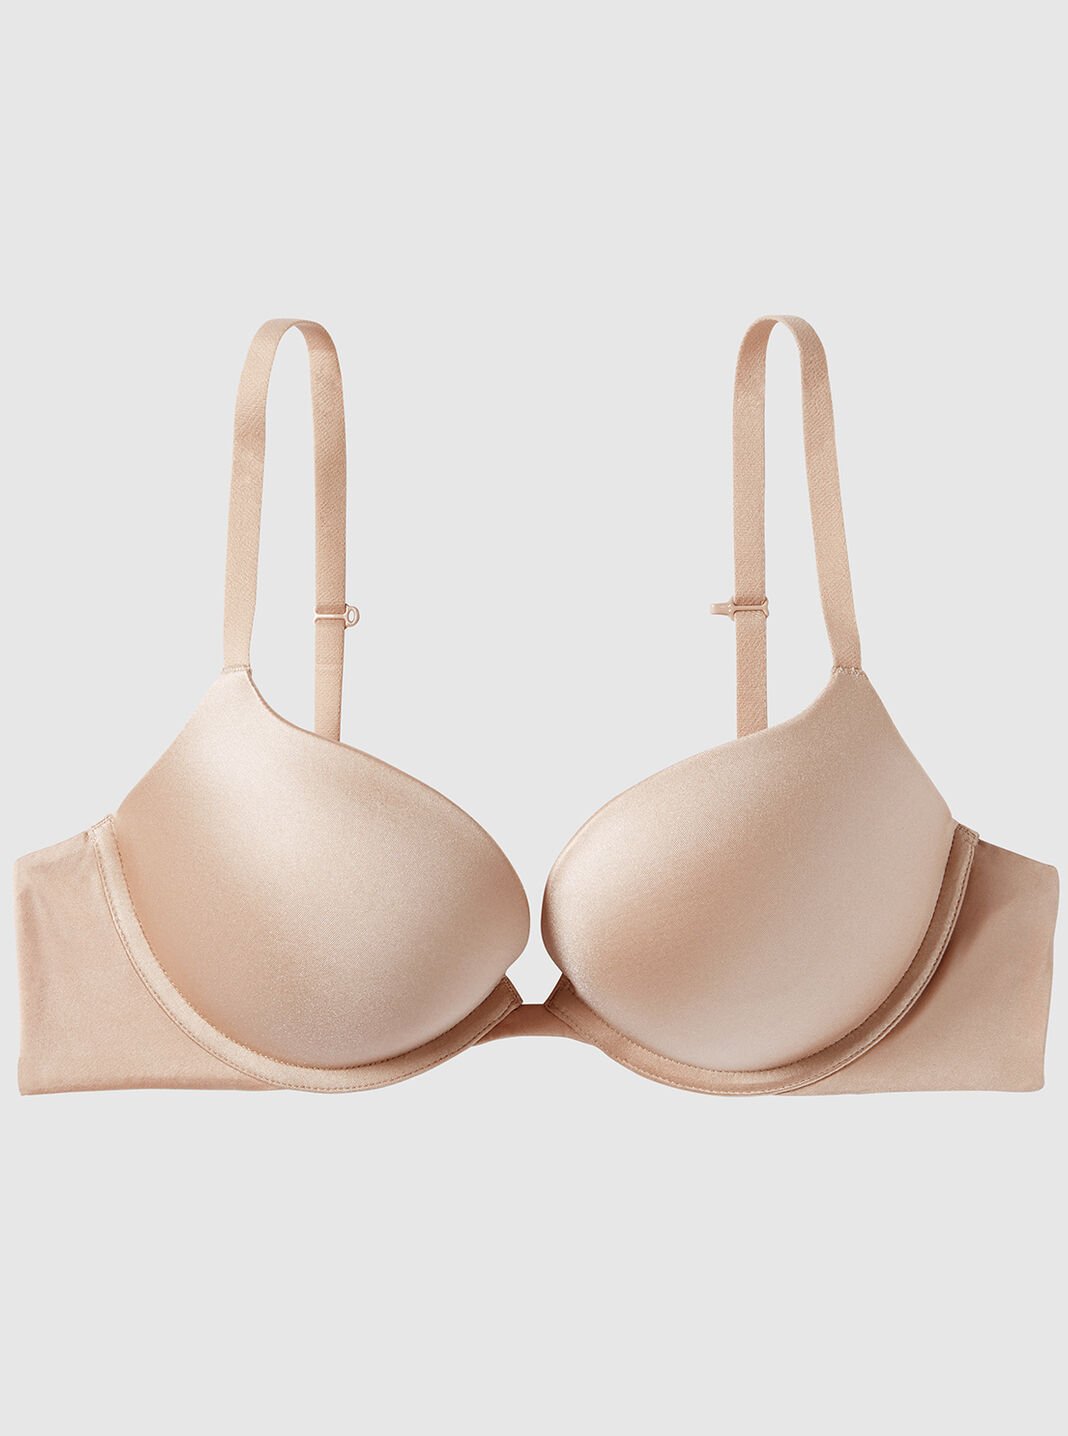 Push Up Bras, Sexy, Strapless, Plunge & More